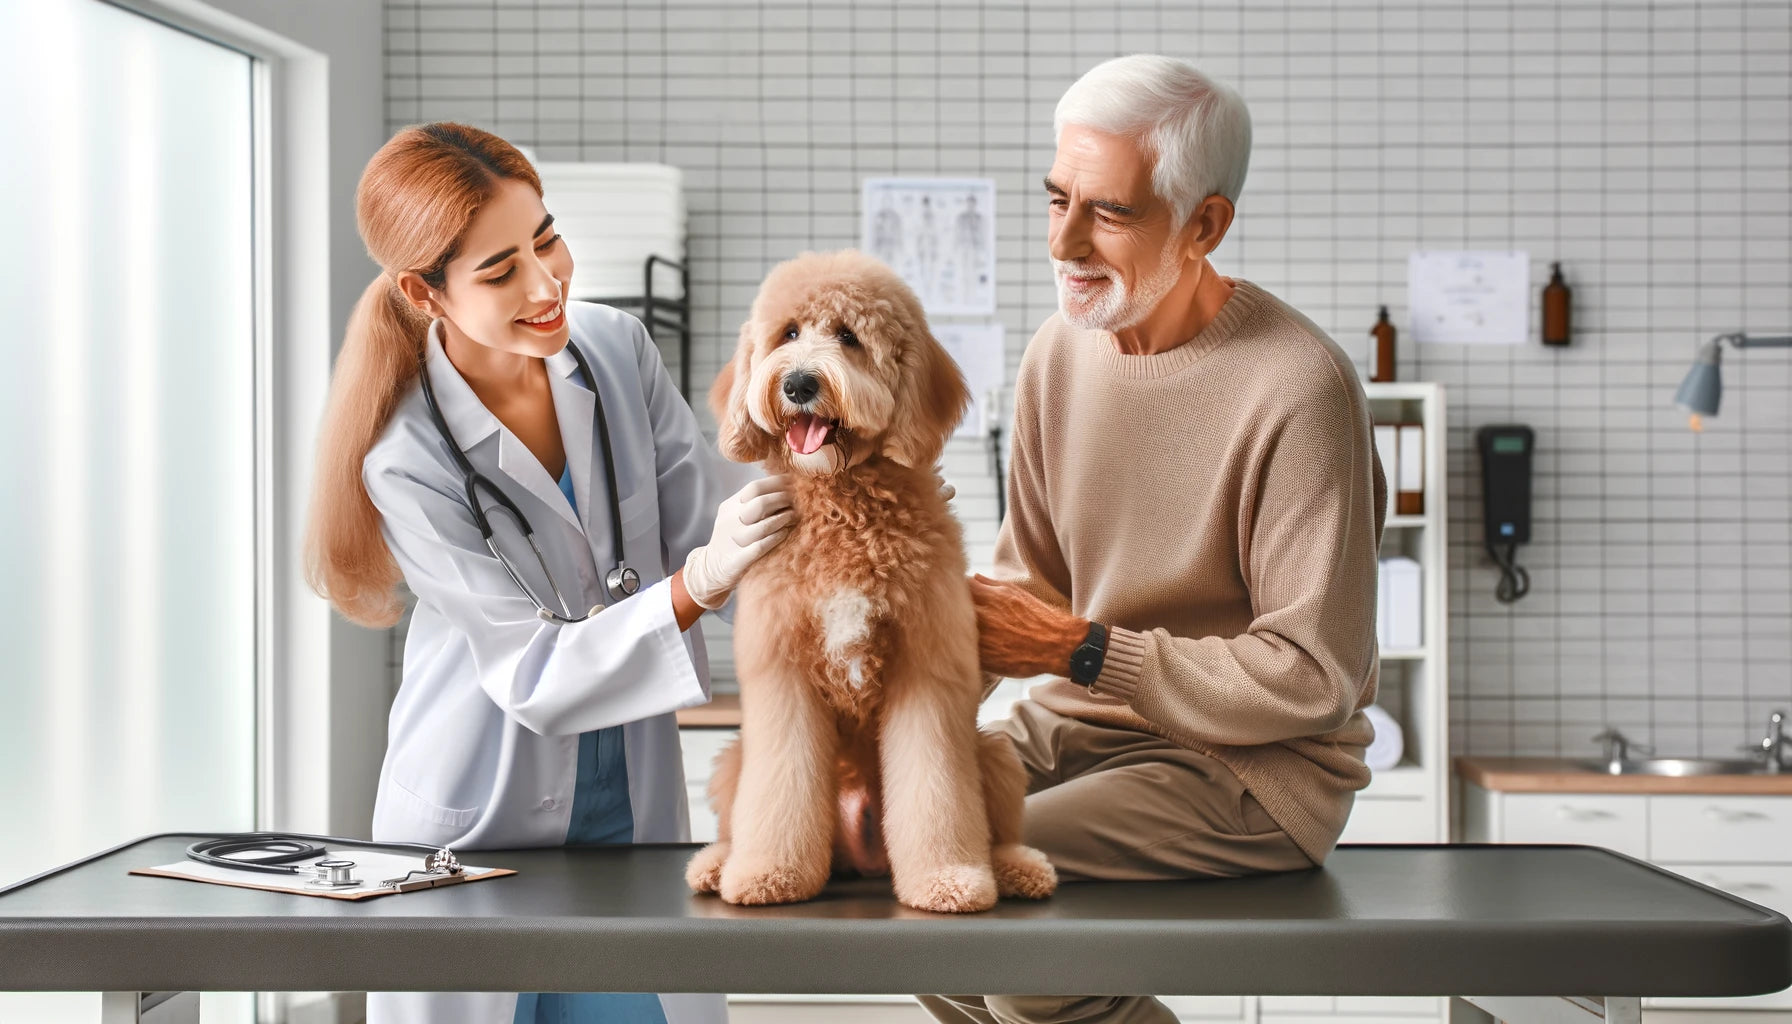 Baby Boomer and their Mini Goldendoodle visiting the vet for a check-up, emphasizing the importance of preventative health care in ensuring a long healthy life.